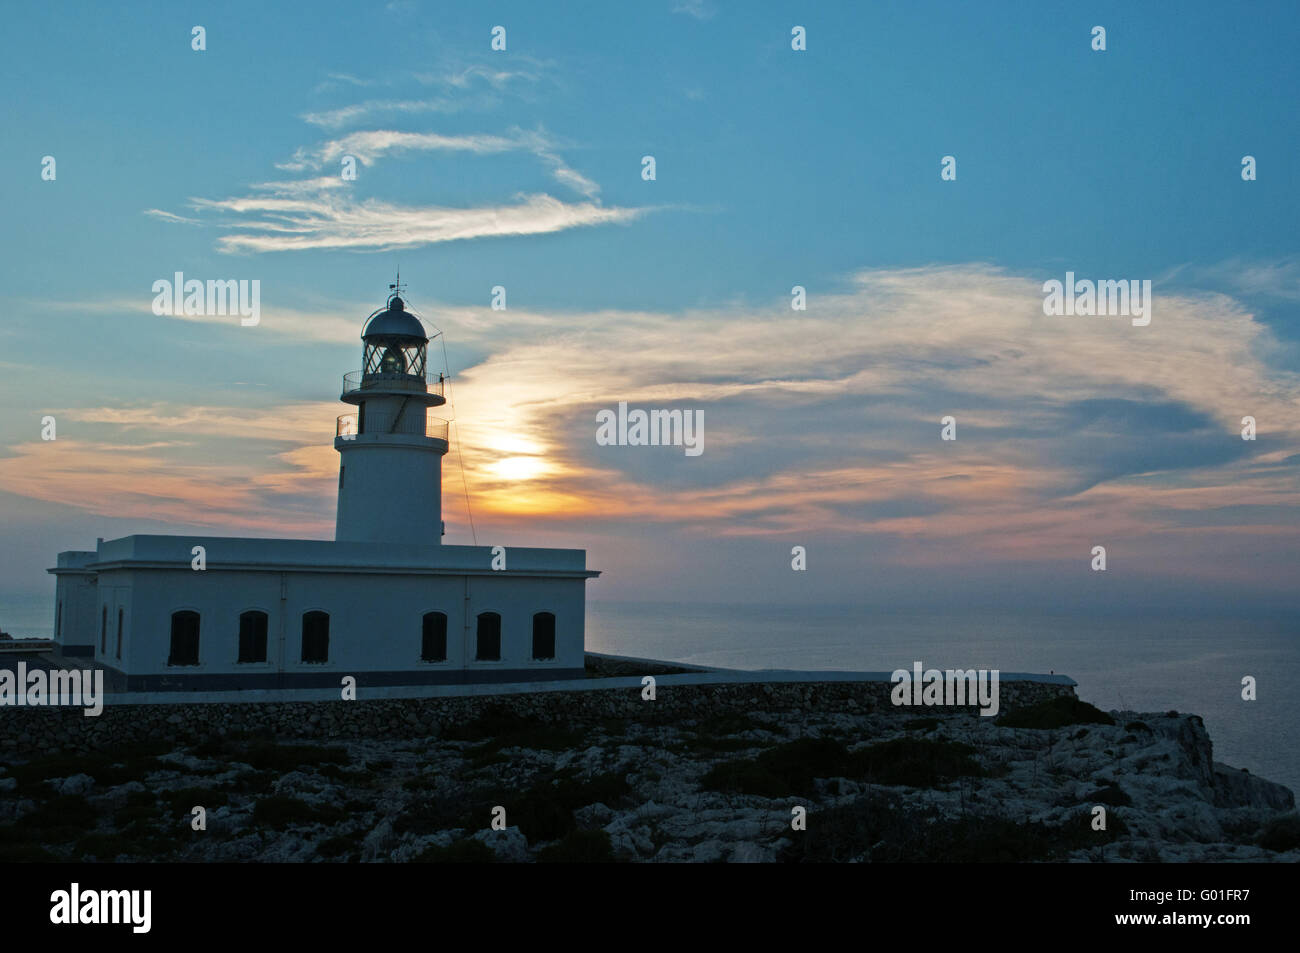 Minorca, Balearic islands, Spain: sunset at Cap de Cavalleria lighthouse, built on a cape that was the scene of numerous shipwrecks throughout history Stock Photo